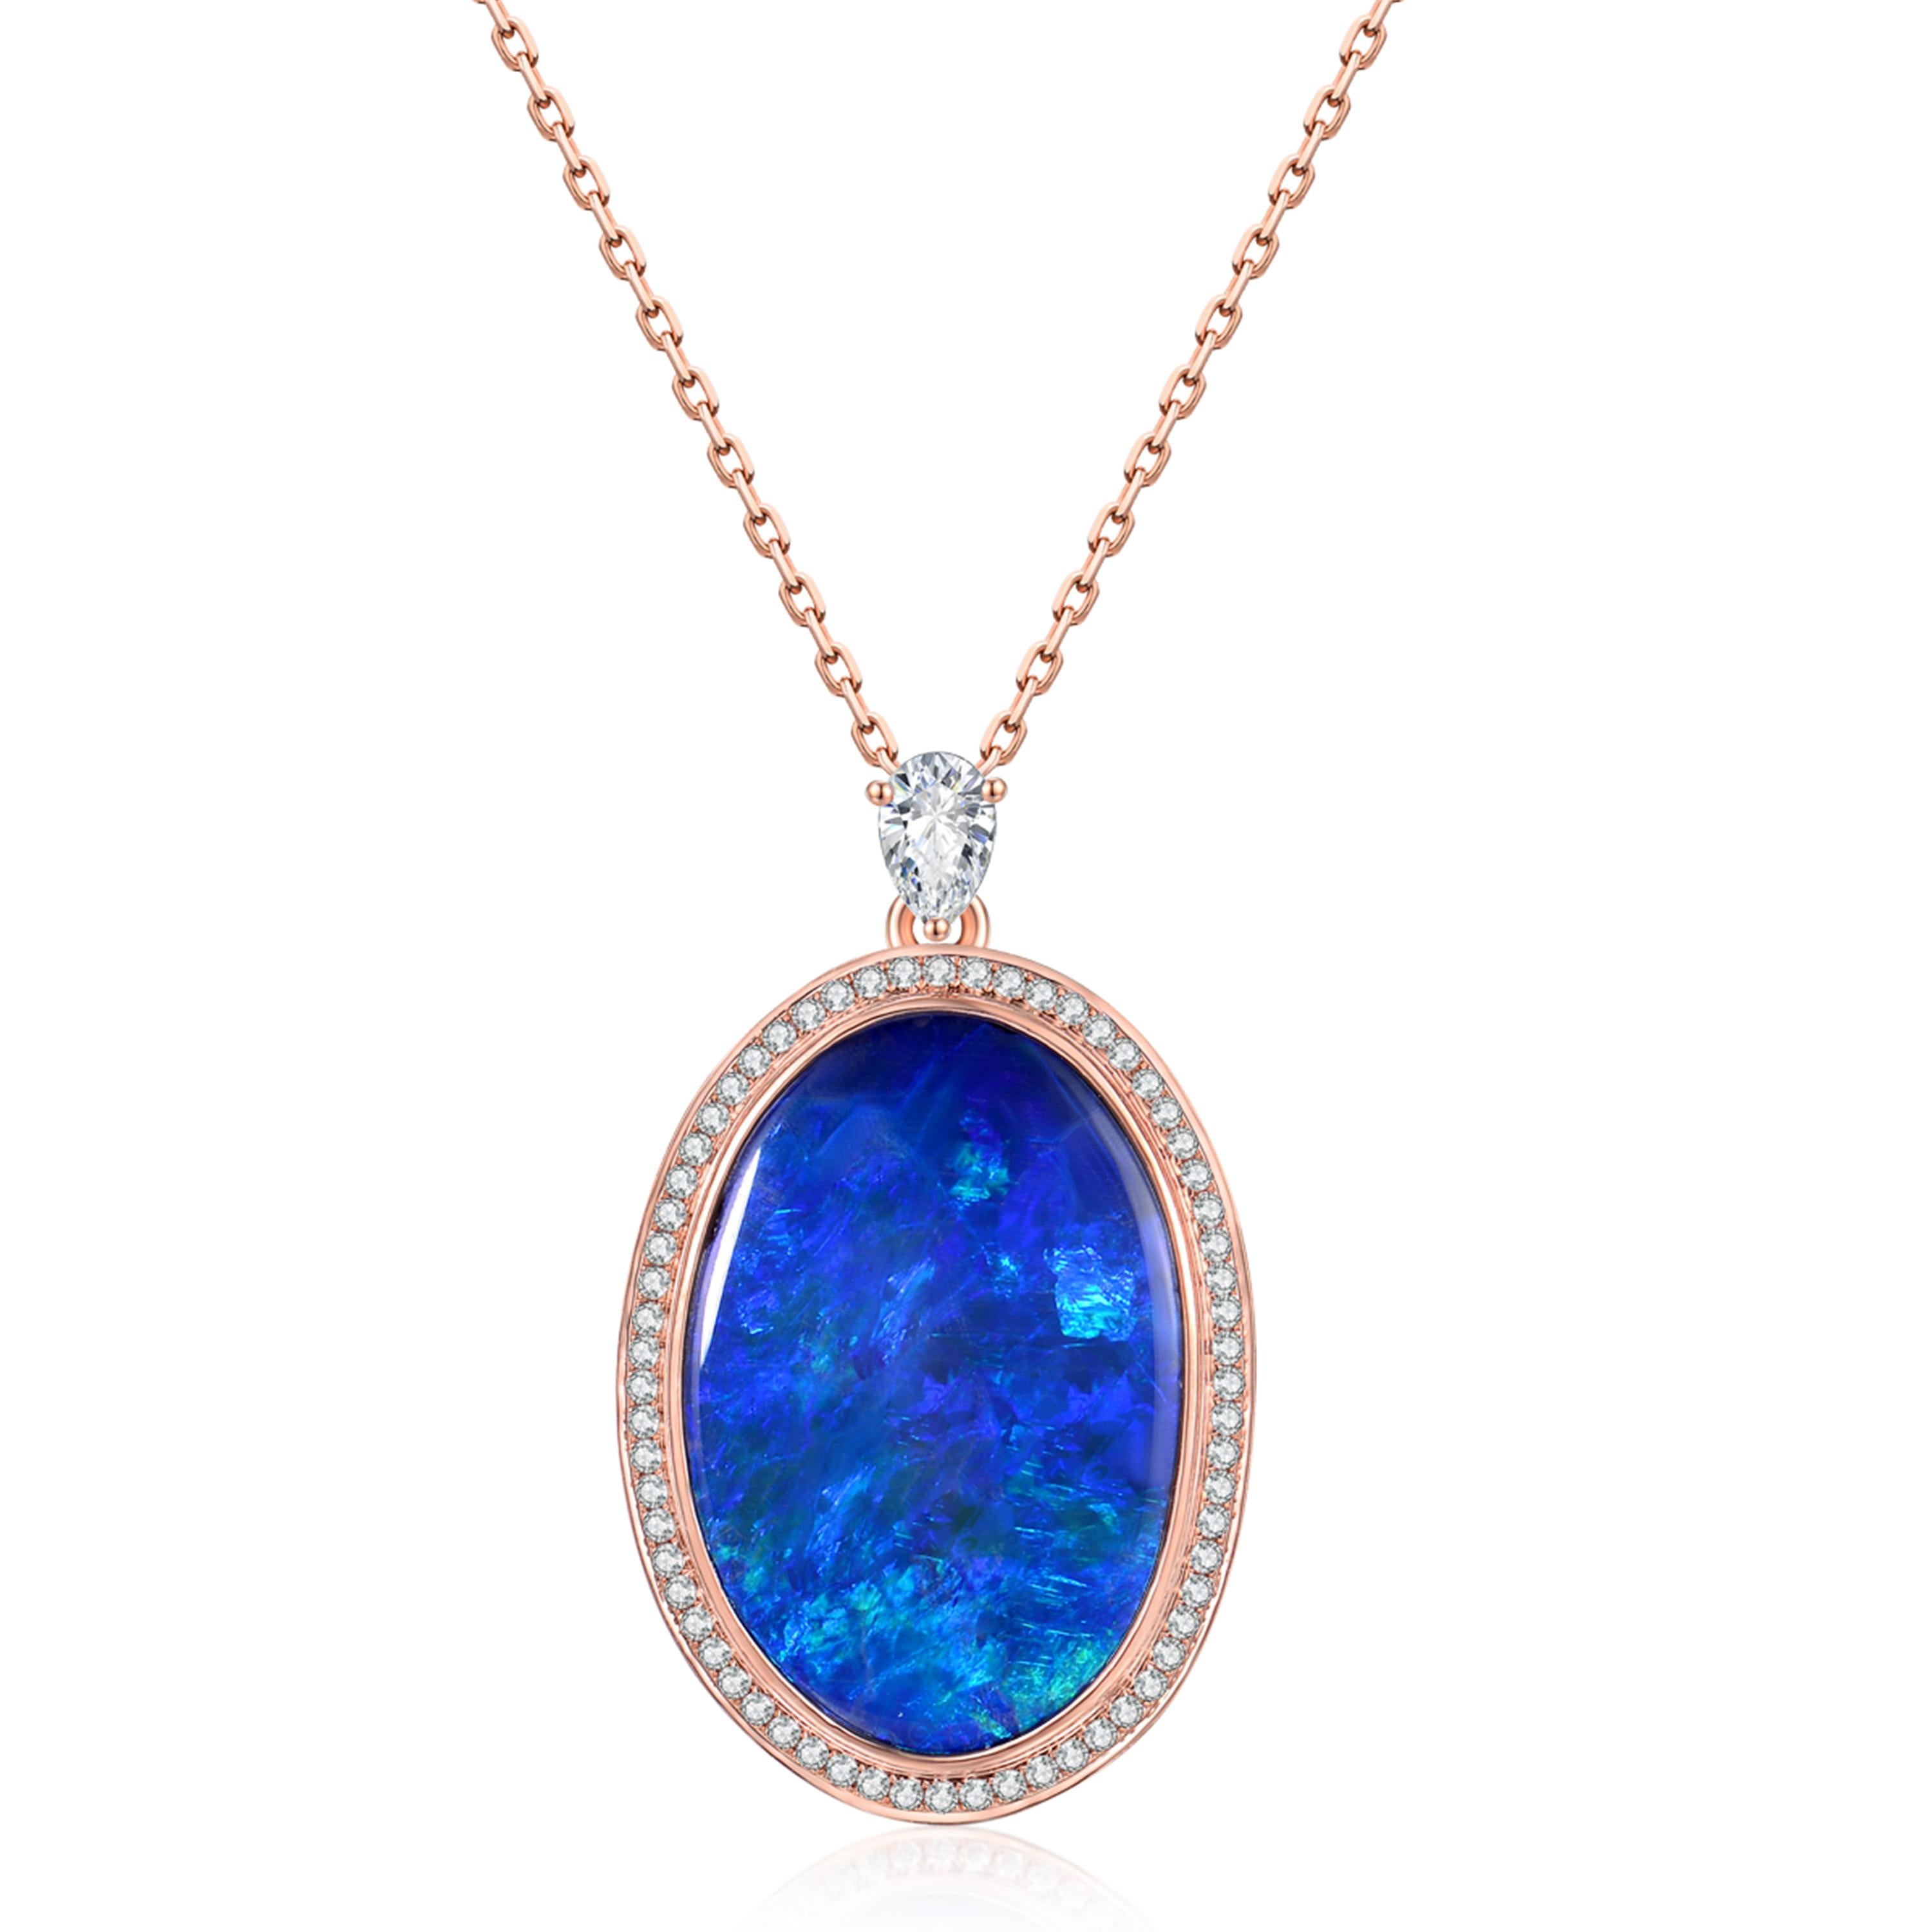 Description:
A one-of-a-kind deep blue boulder opal with a weight of 6.1ct, bordered by a halo of brilliant diamonds with a total weight of 0.32ct, set in 18ct rose gold.

Opal care: Clean opals with luke-warm soapy water.

Specification:
Size